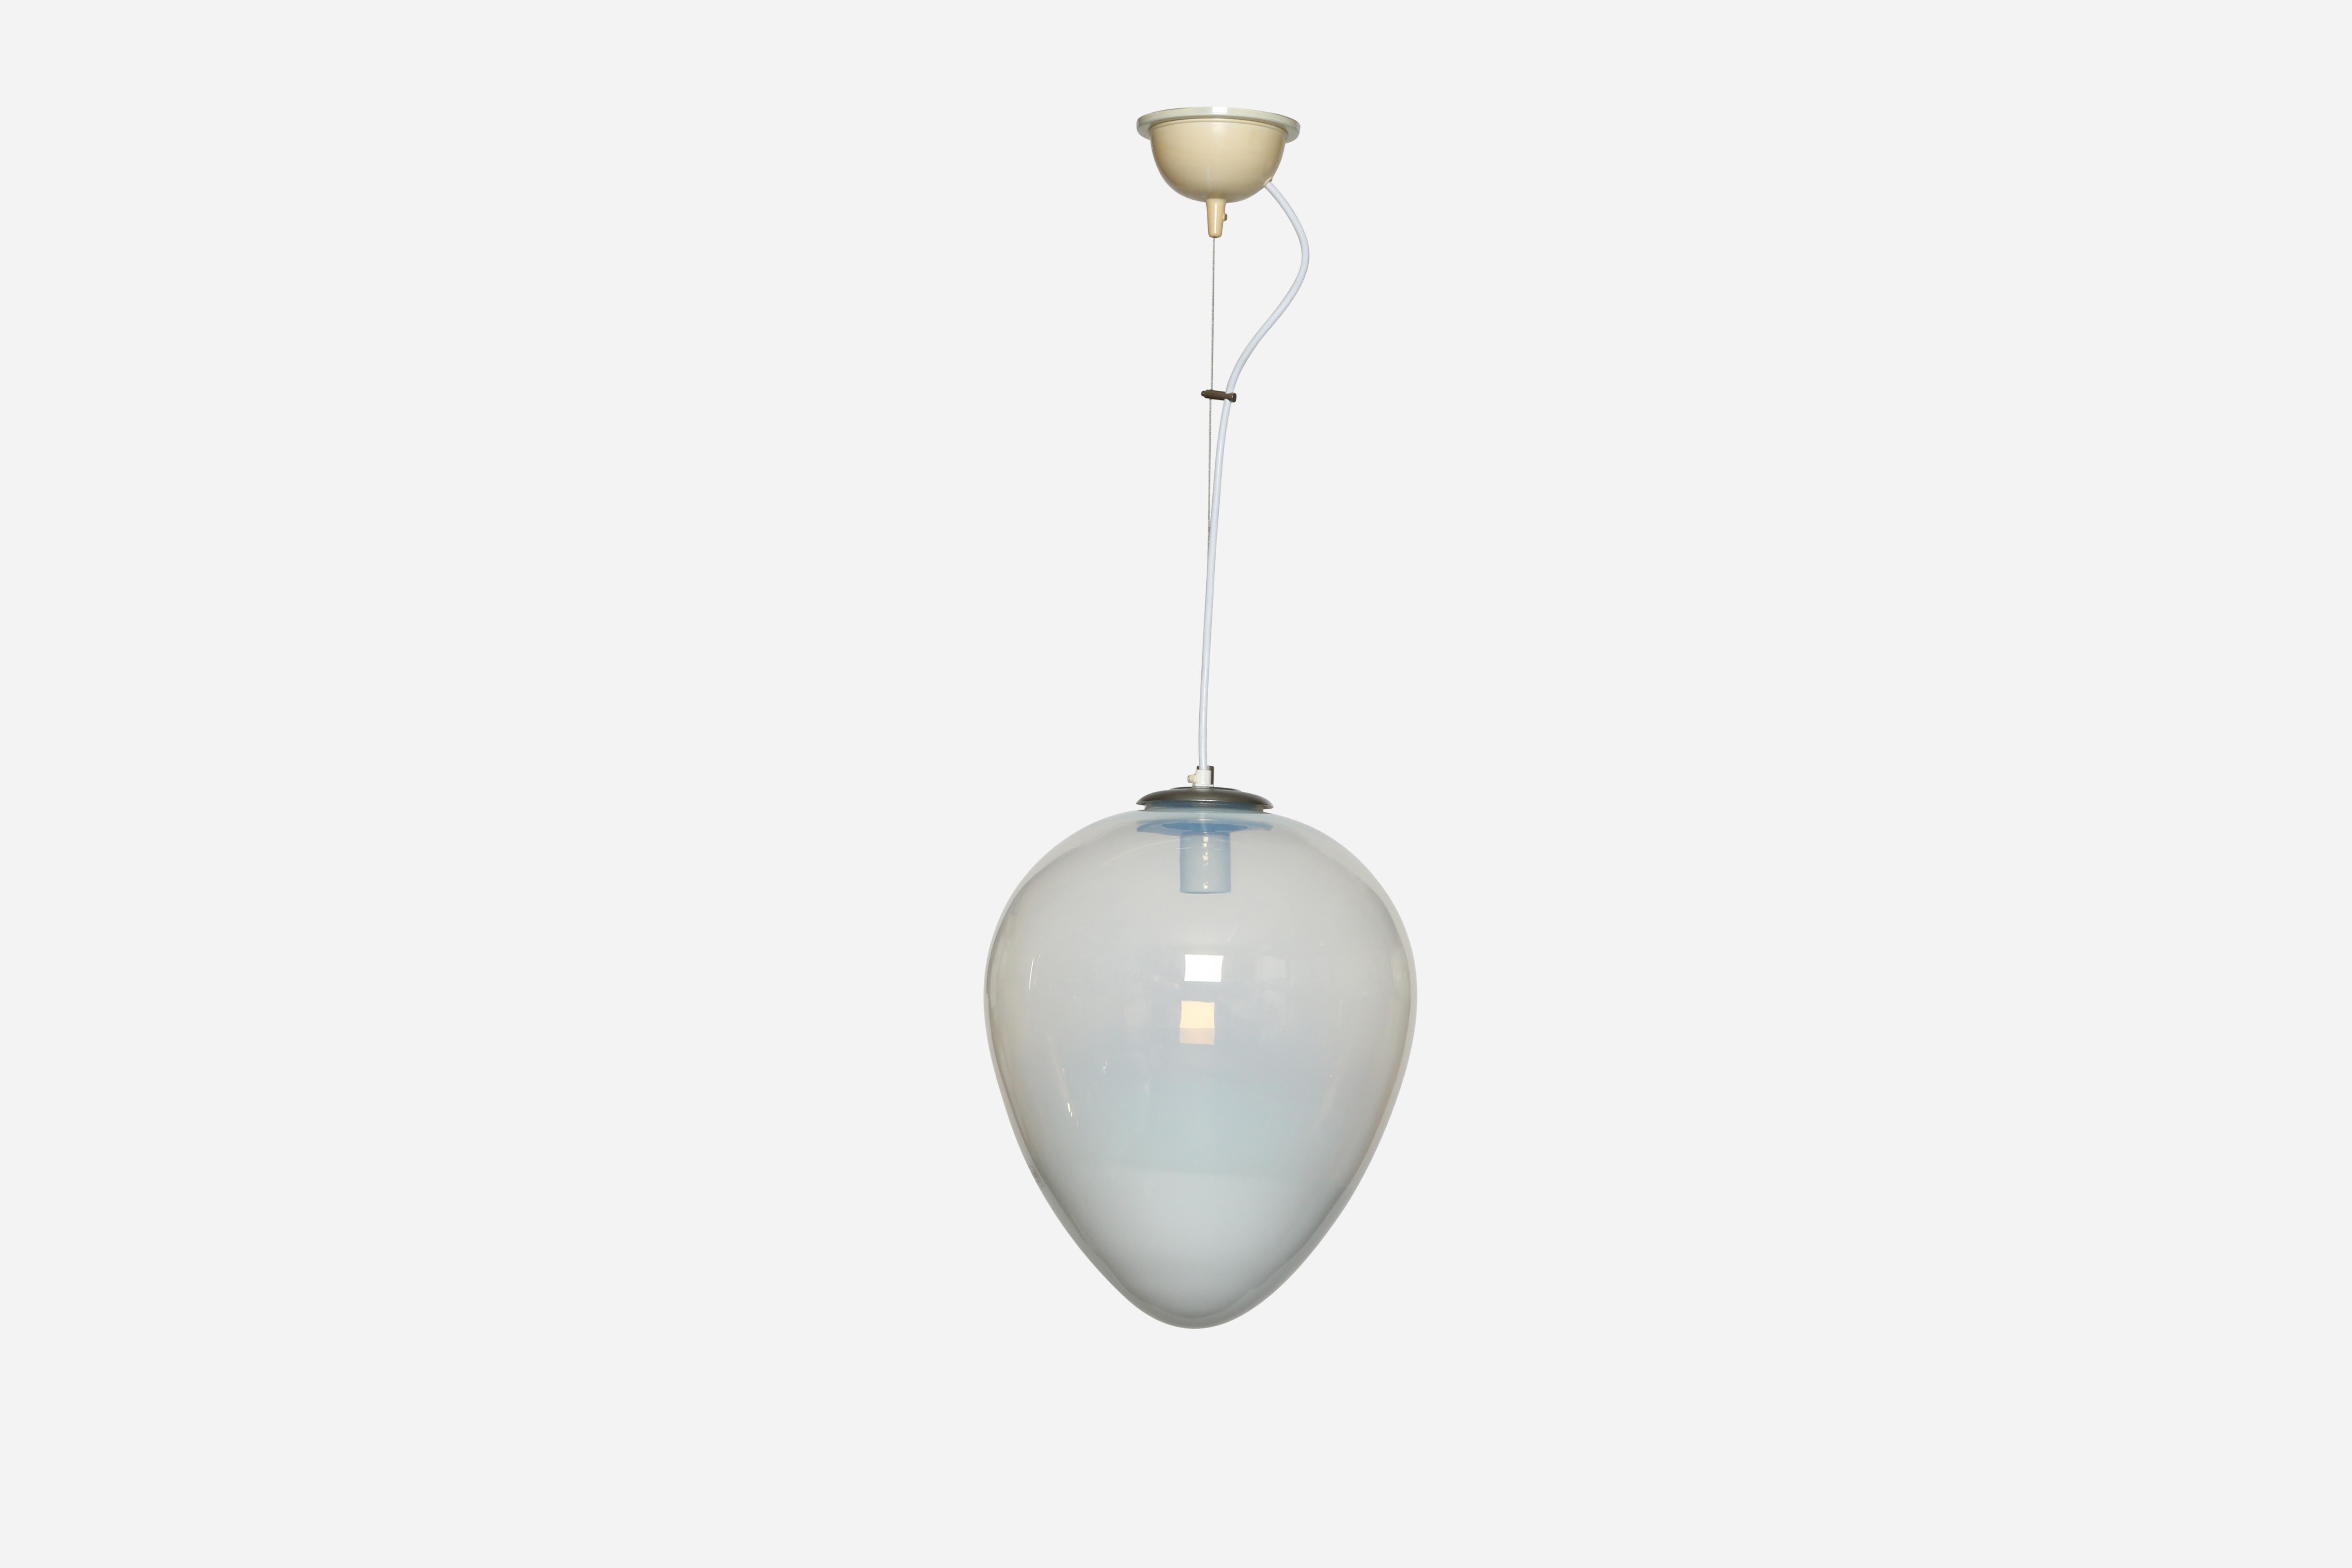 Murano glass ceiling pendant by Leucos.
Made in Italy in 1970s.
Handblown glass.
Rewired for US.
Takes one medium base bulb.
Overall drop is adjustable, can be shorter.
2 ceiling pendants are available.
Price is for 1 pendant.

We take pride in